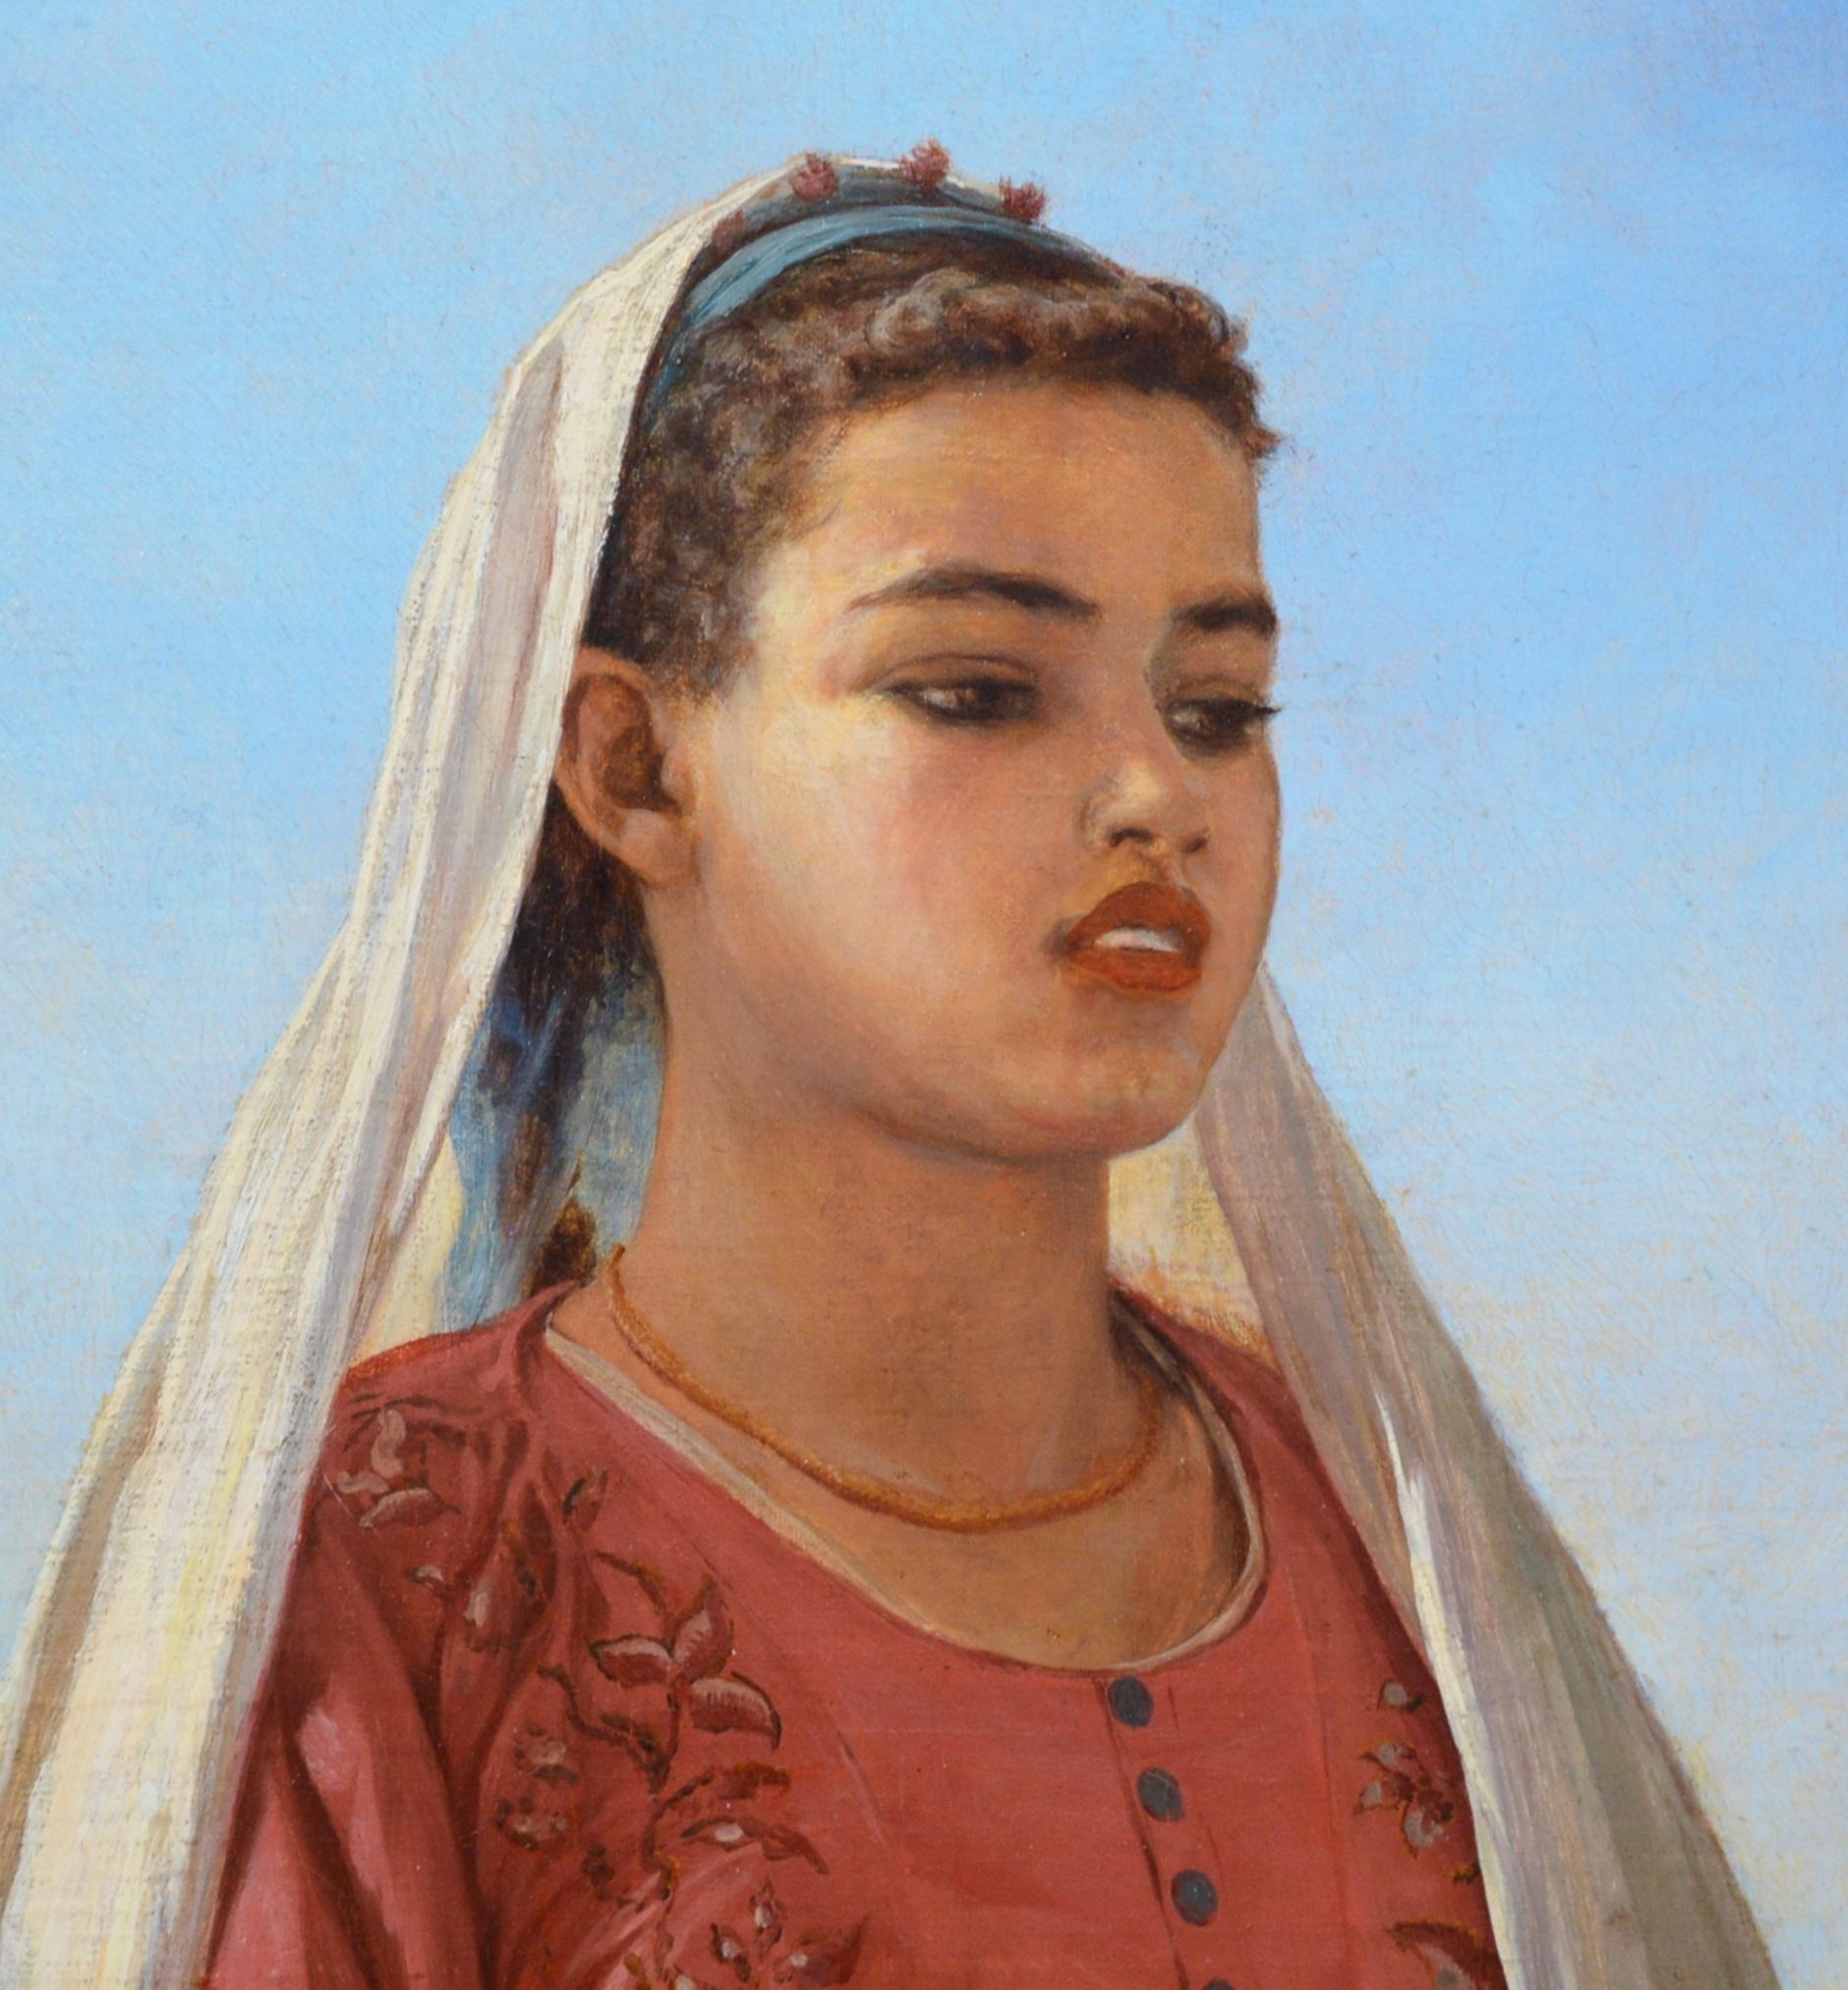 Almeh on the Nile - Orientalist Oil Painting of Egypt Beauty Royal Academy 1910  - Brown Portrait Painting by Walter Charles Horsley 